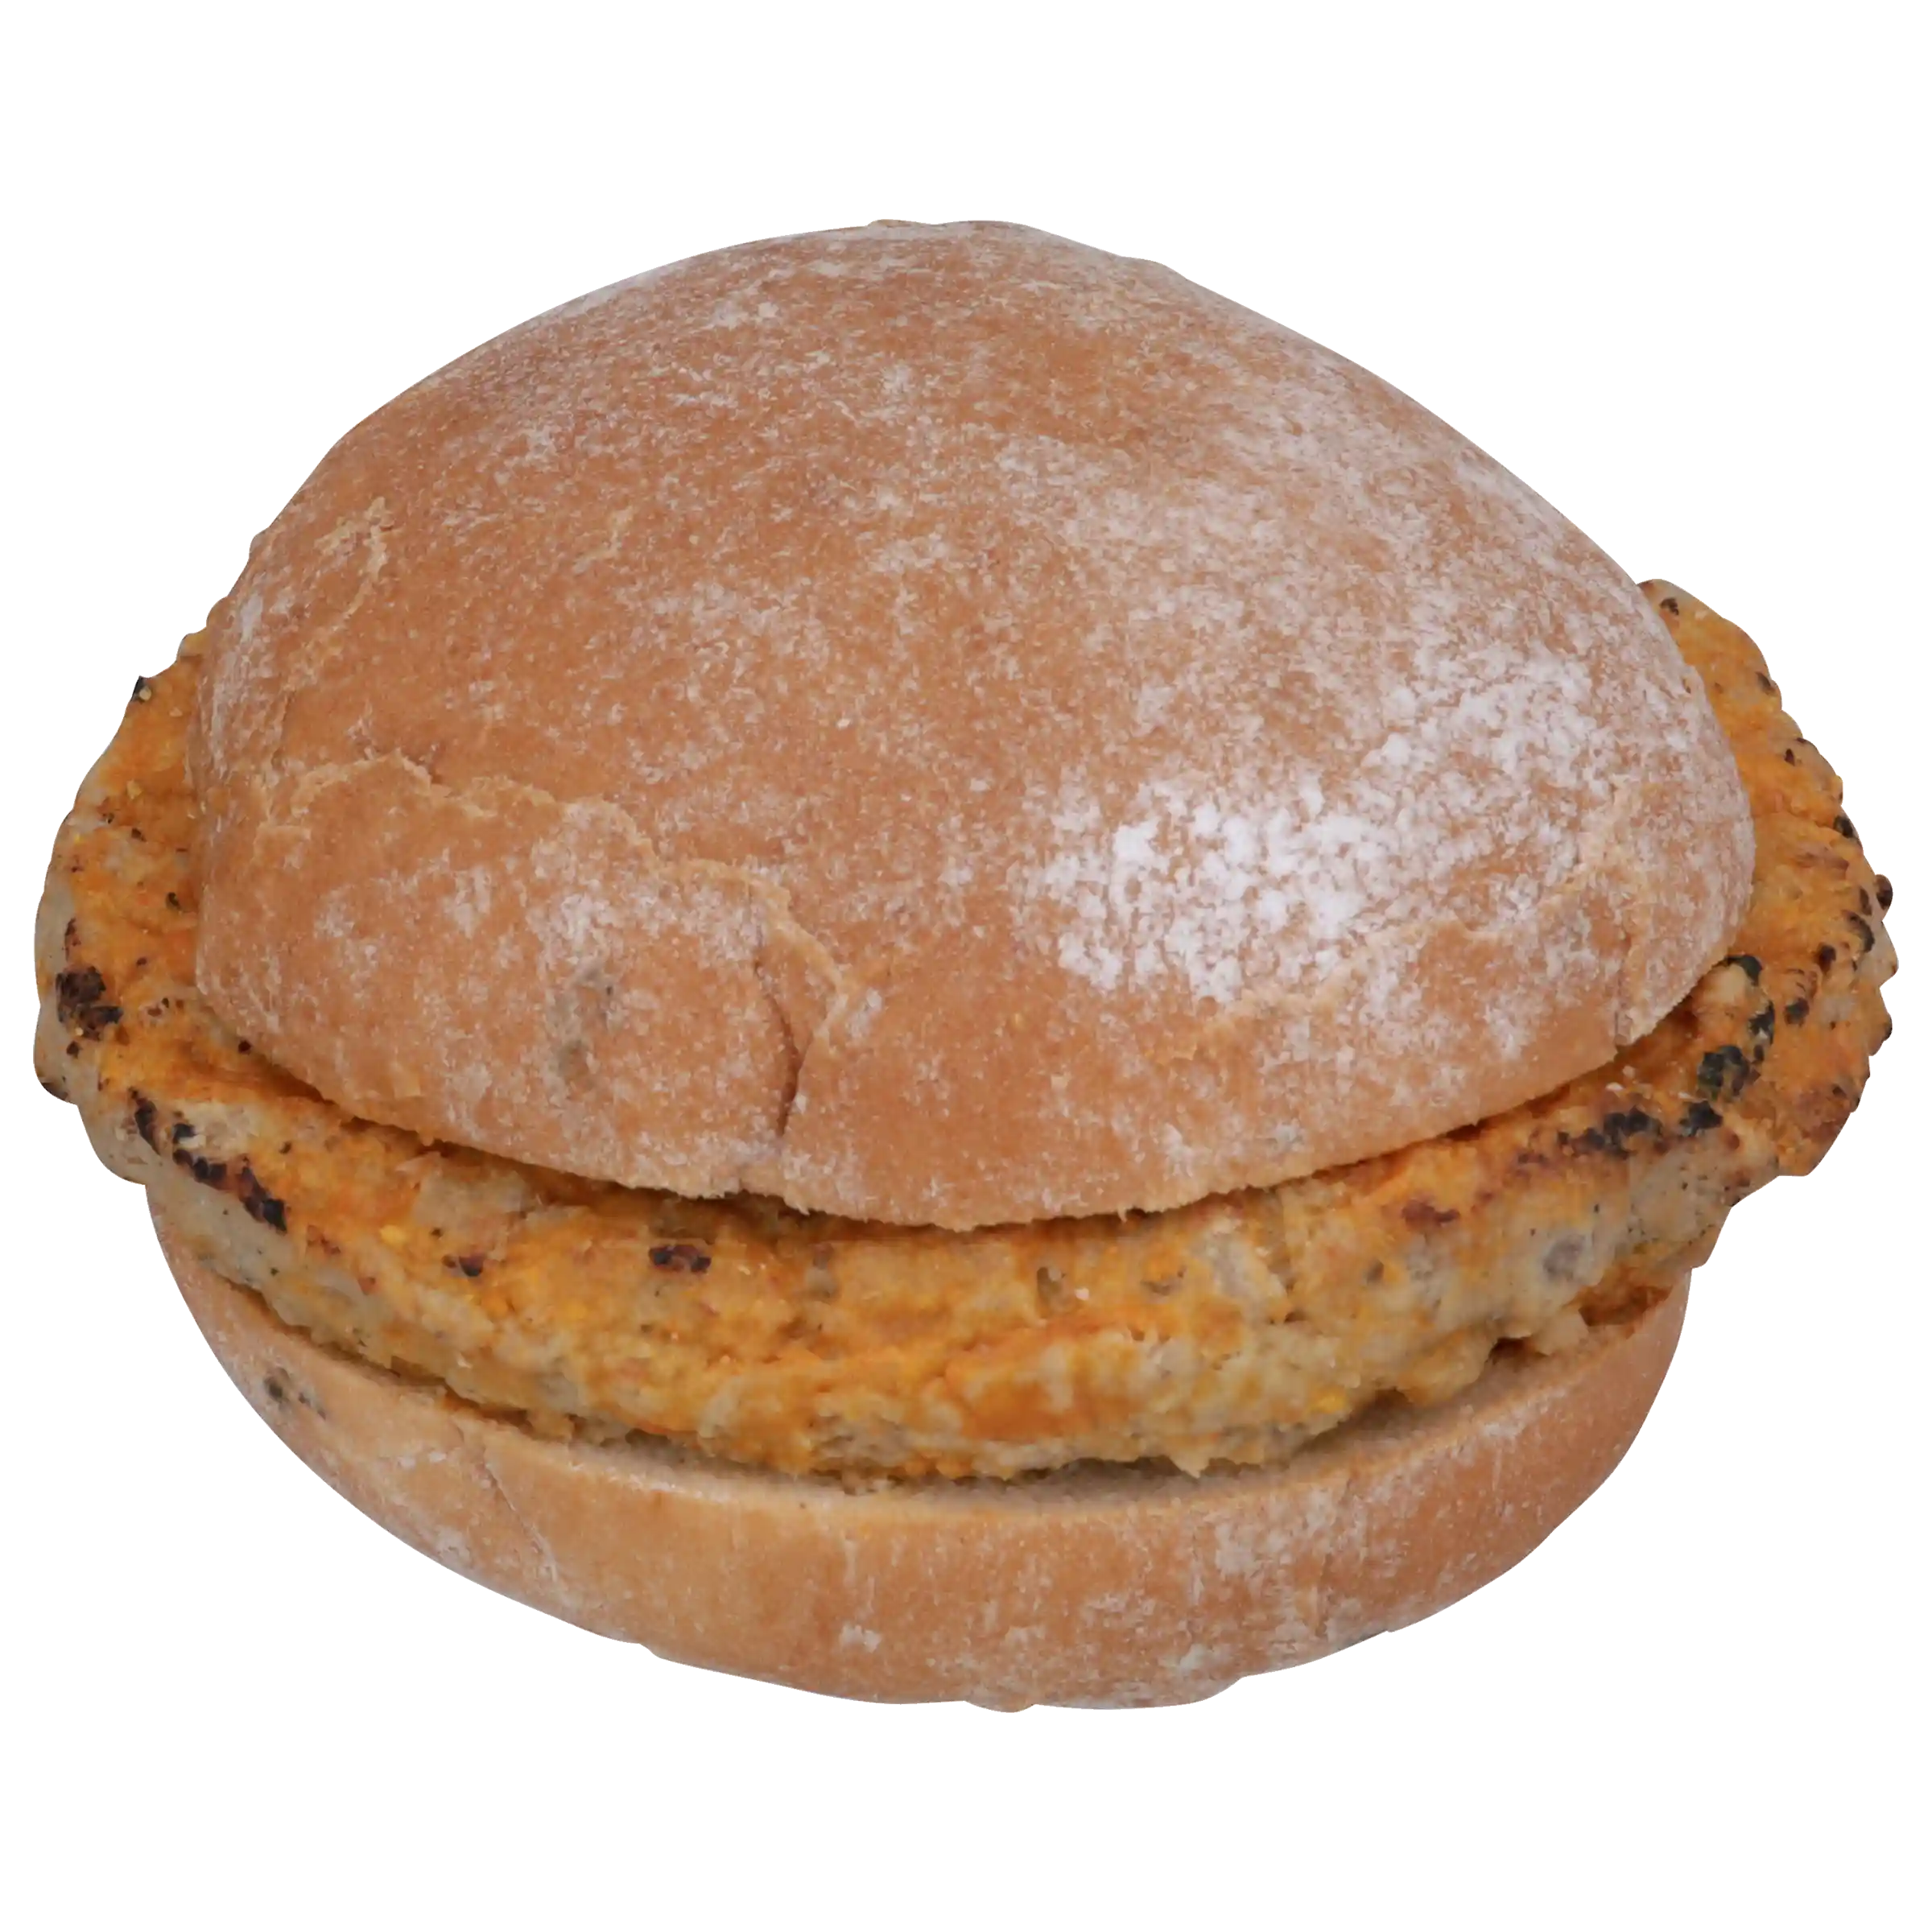 Hot 'n' Ready® Meatloaf Sandwich With Ketchup_image_01